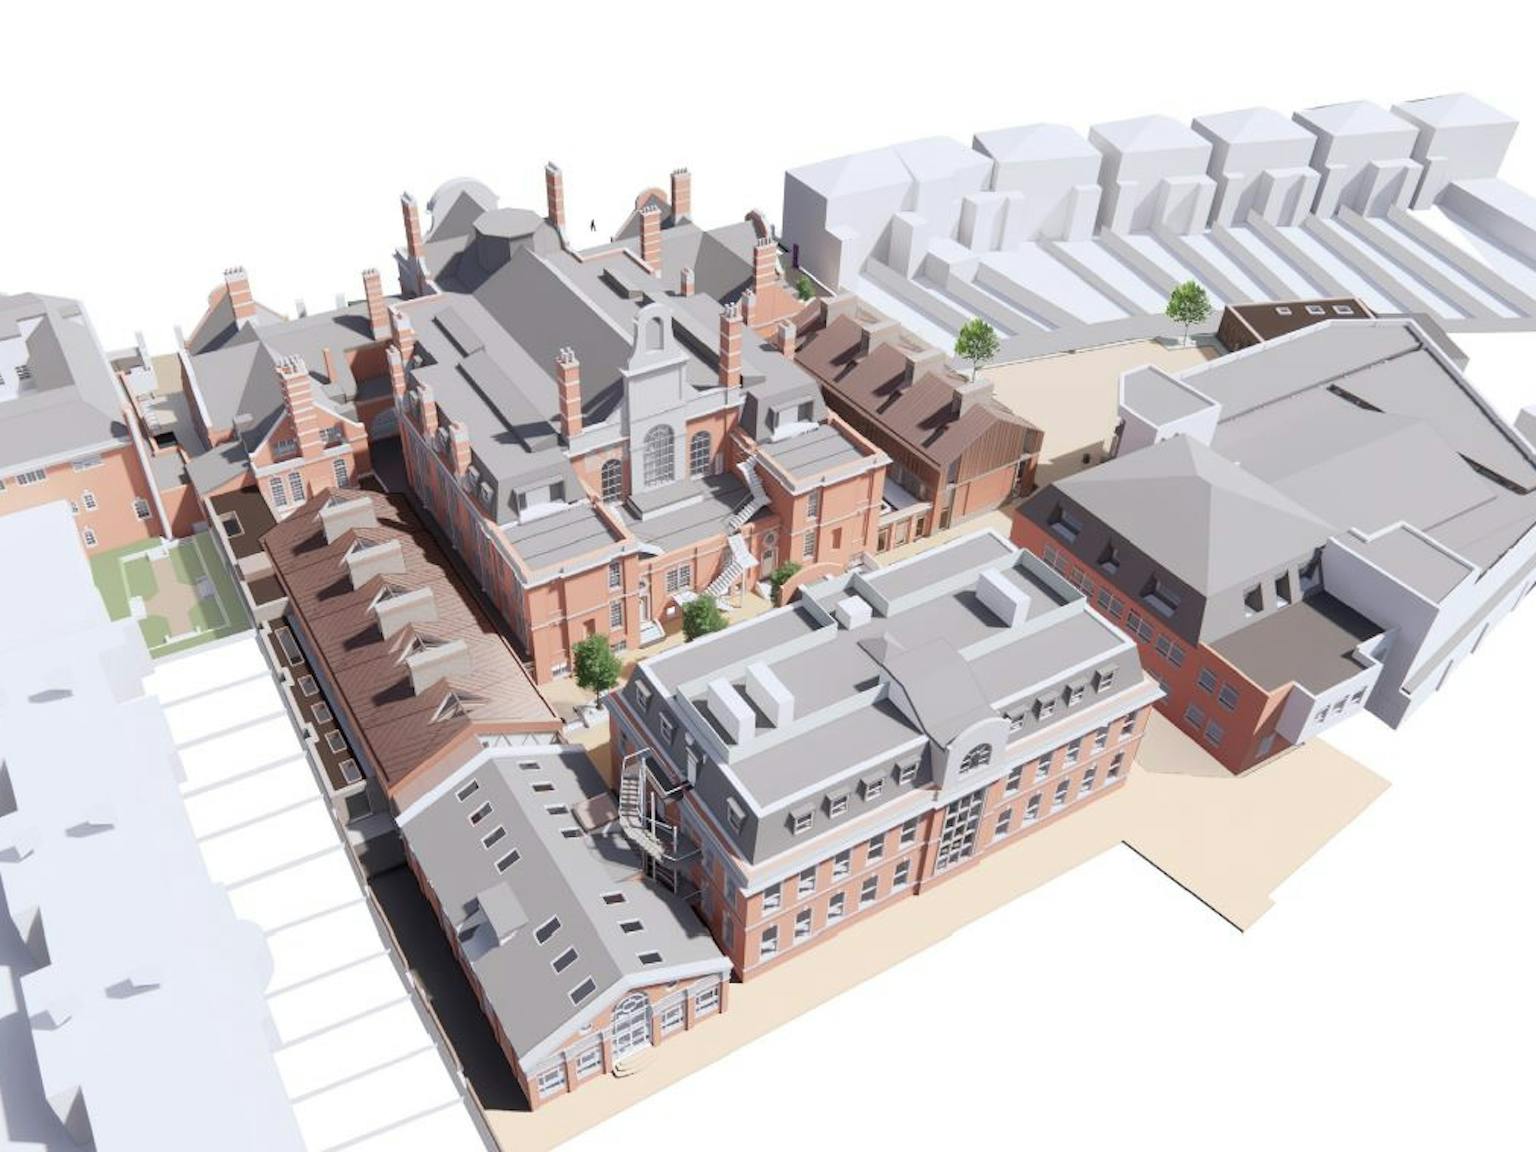 St Paul’s Girls’ School renderings, courtesy of Jestico + Whiles